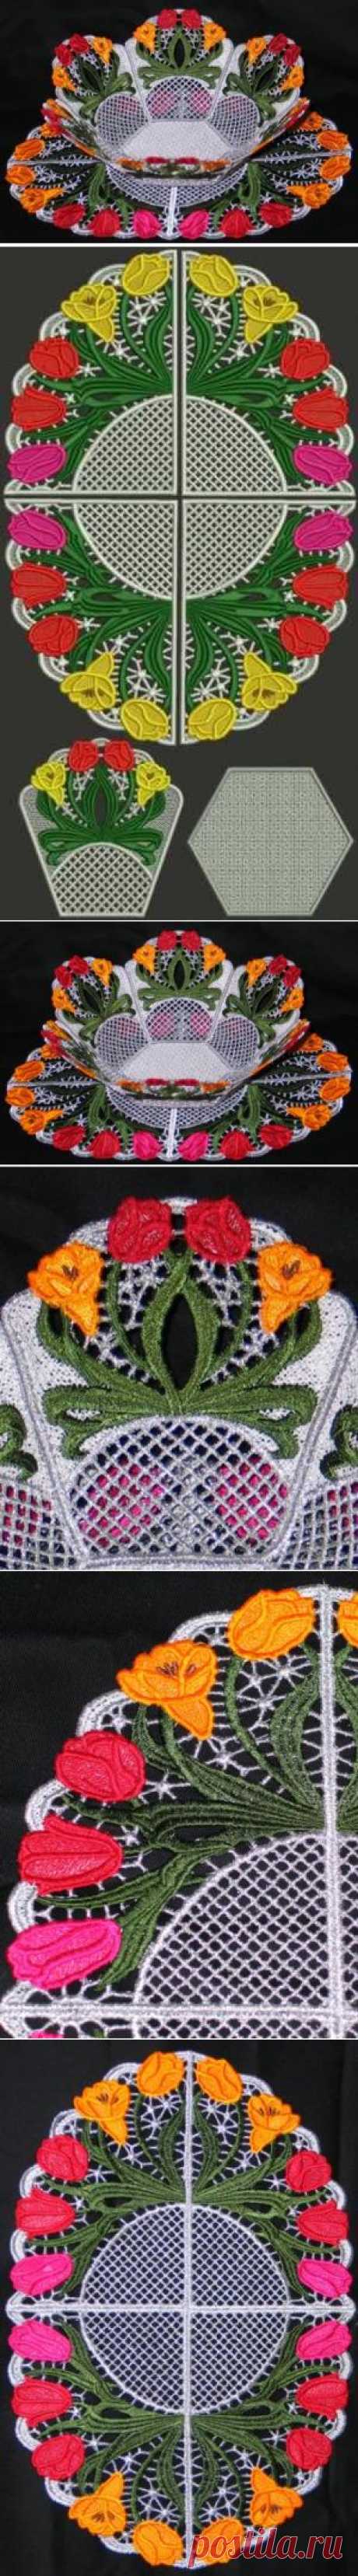 Advanced Embroidery Designs - Tulip Bouquet Bowl and Doily Set